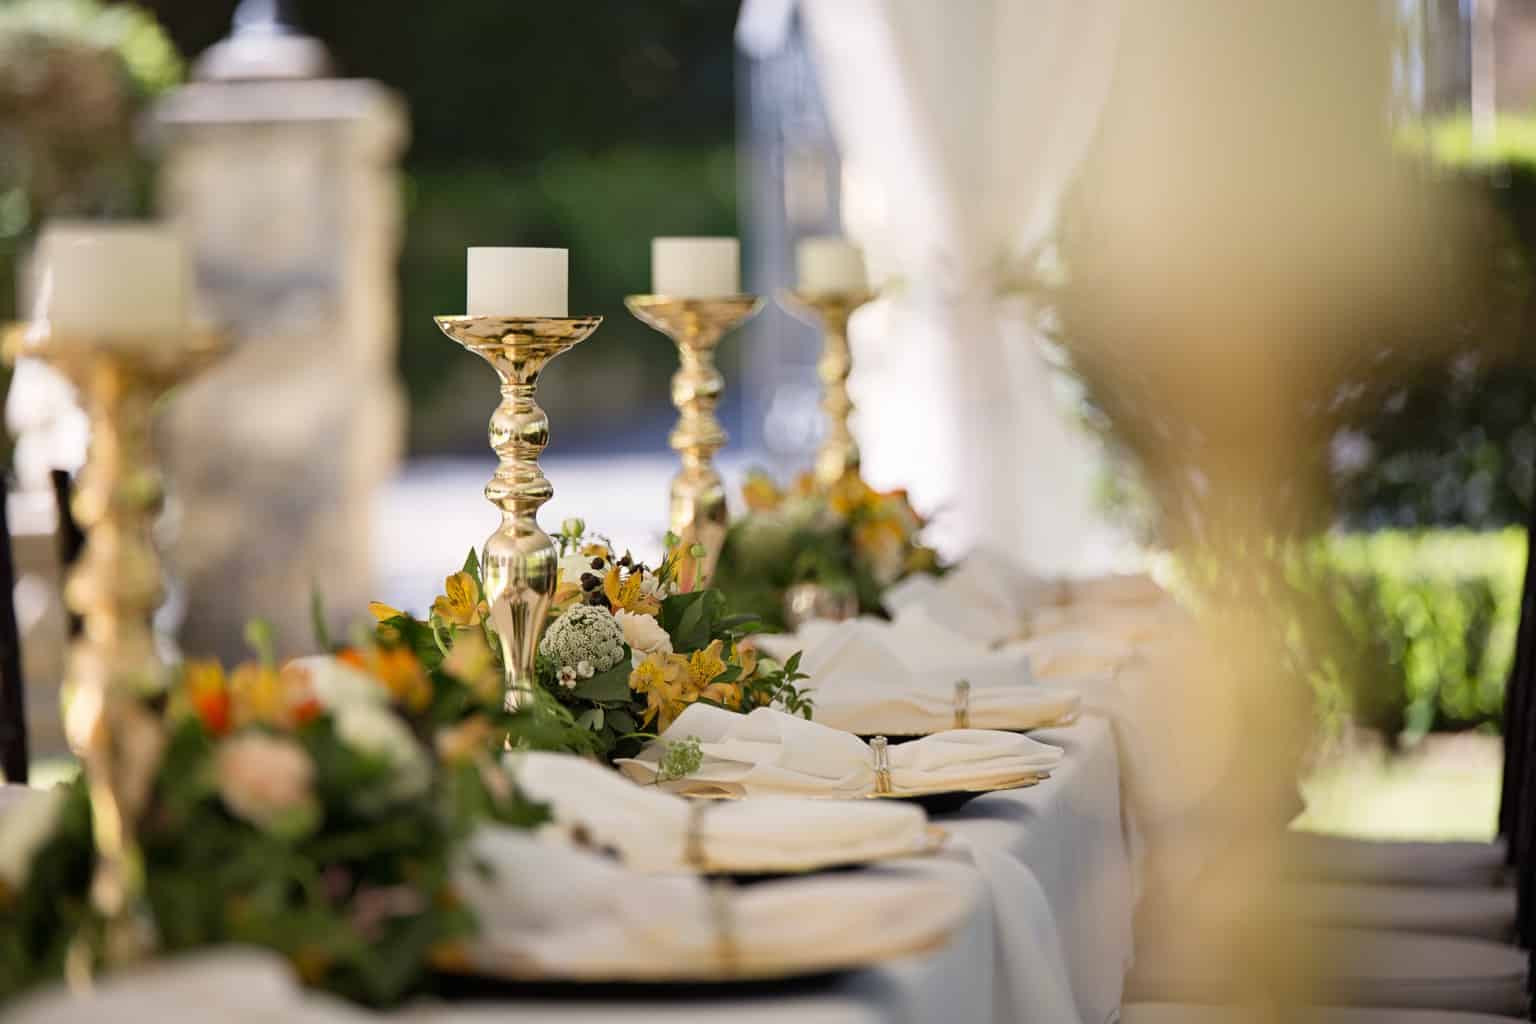 Selective Focus of Candlesticks on Table With Wedding Set-up